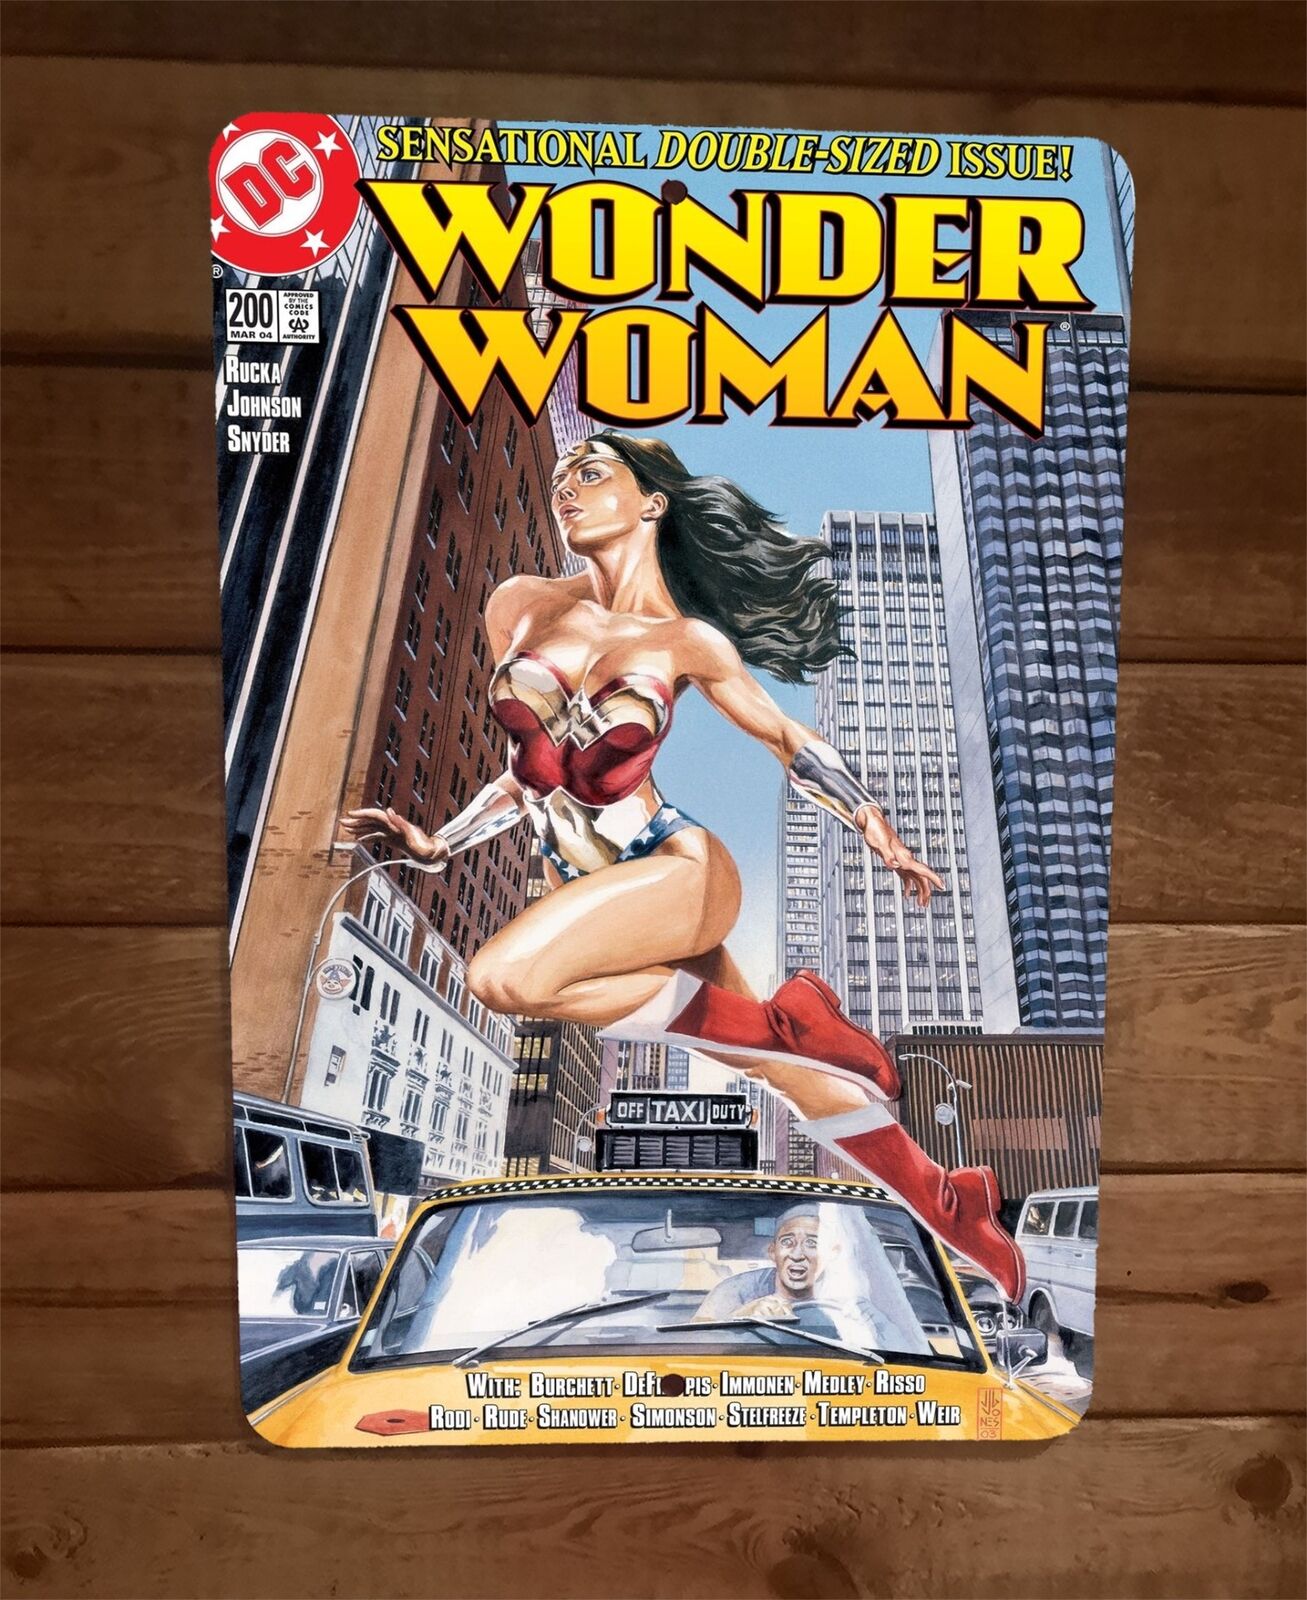 Wonder Woman 200 March 04 DC Comics Cover 8x12 Metal Wall Sign Poster